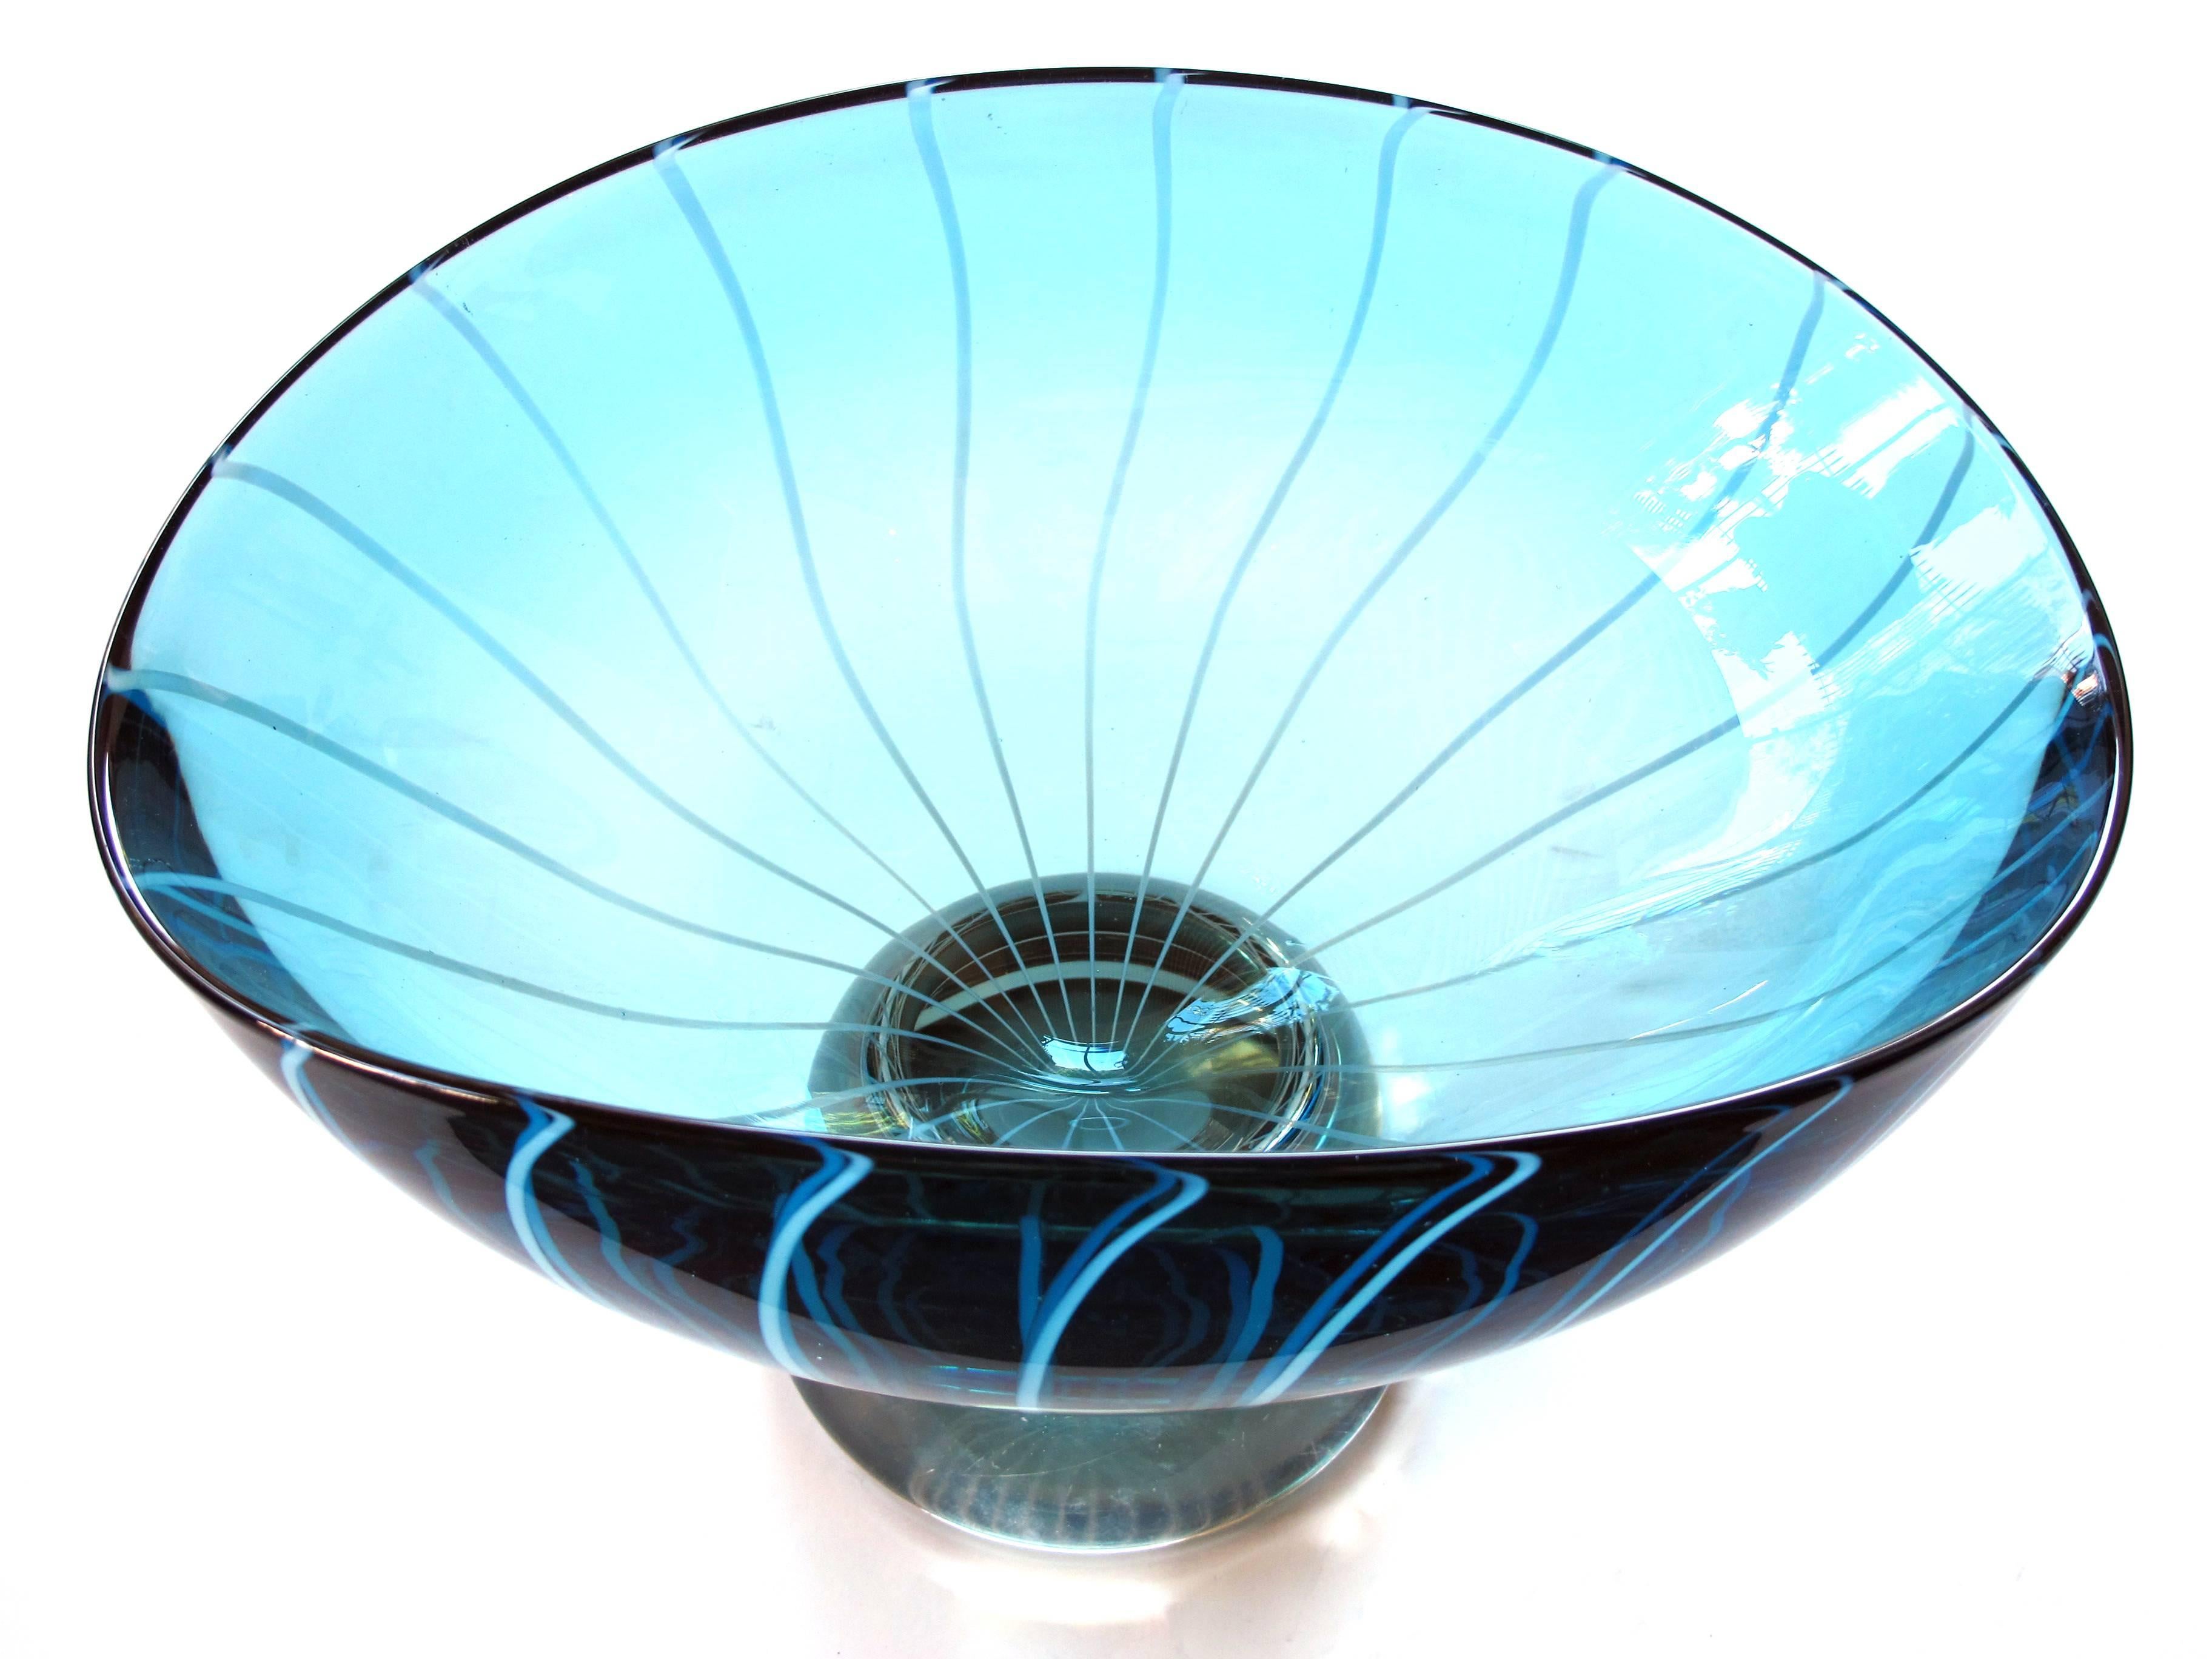 Italian Large-Scale Murano 1960s Teal Art Glass Bowl with White Swirl Decoration